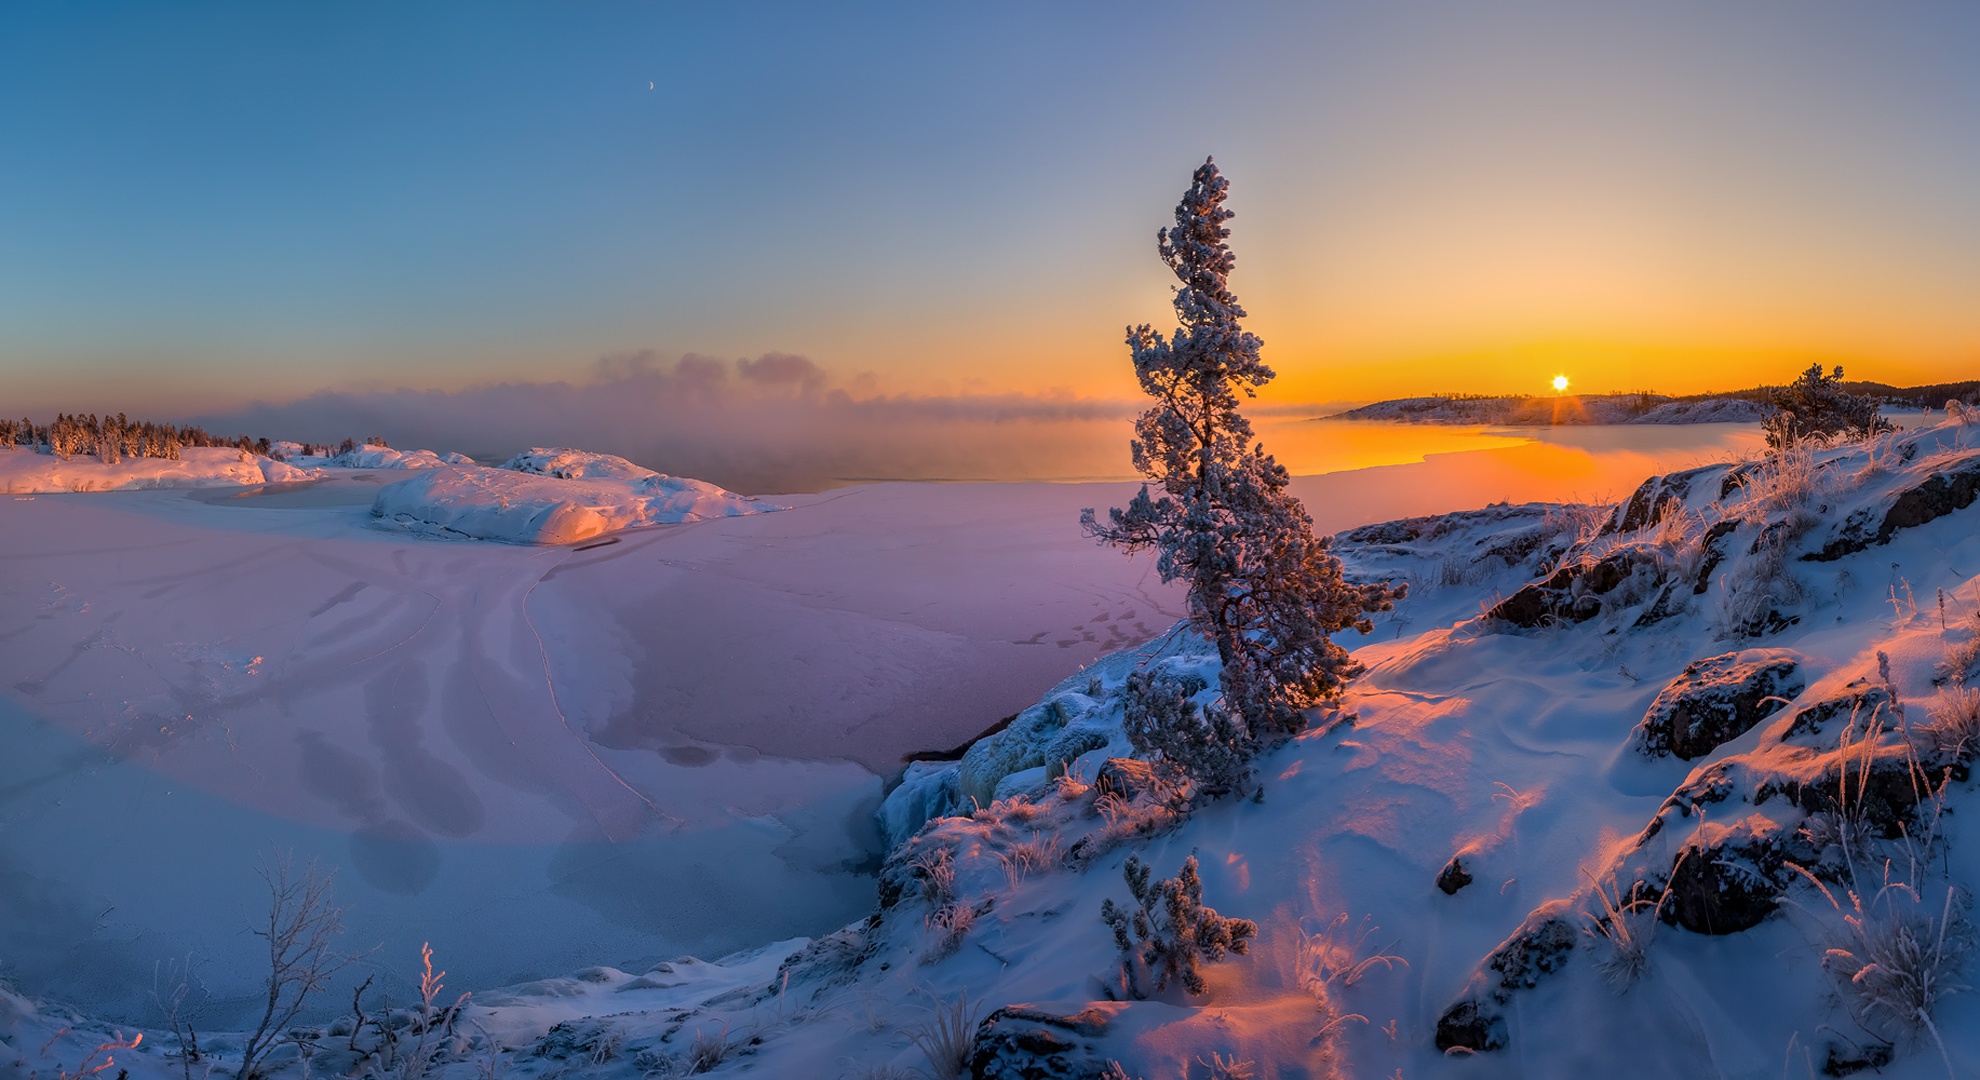 General 1980x1080 landscape snow sunset clear sky winter nature